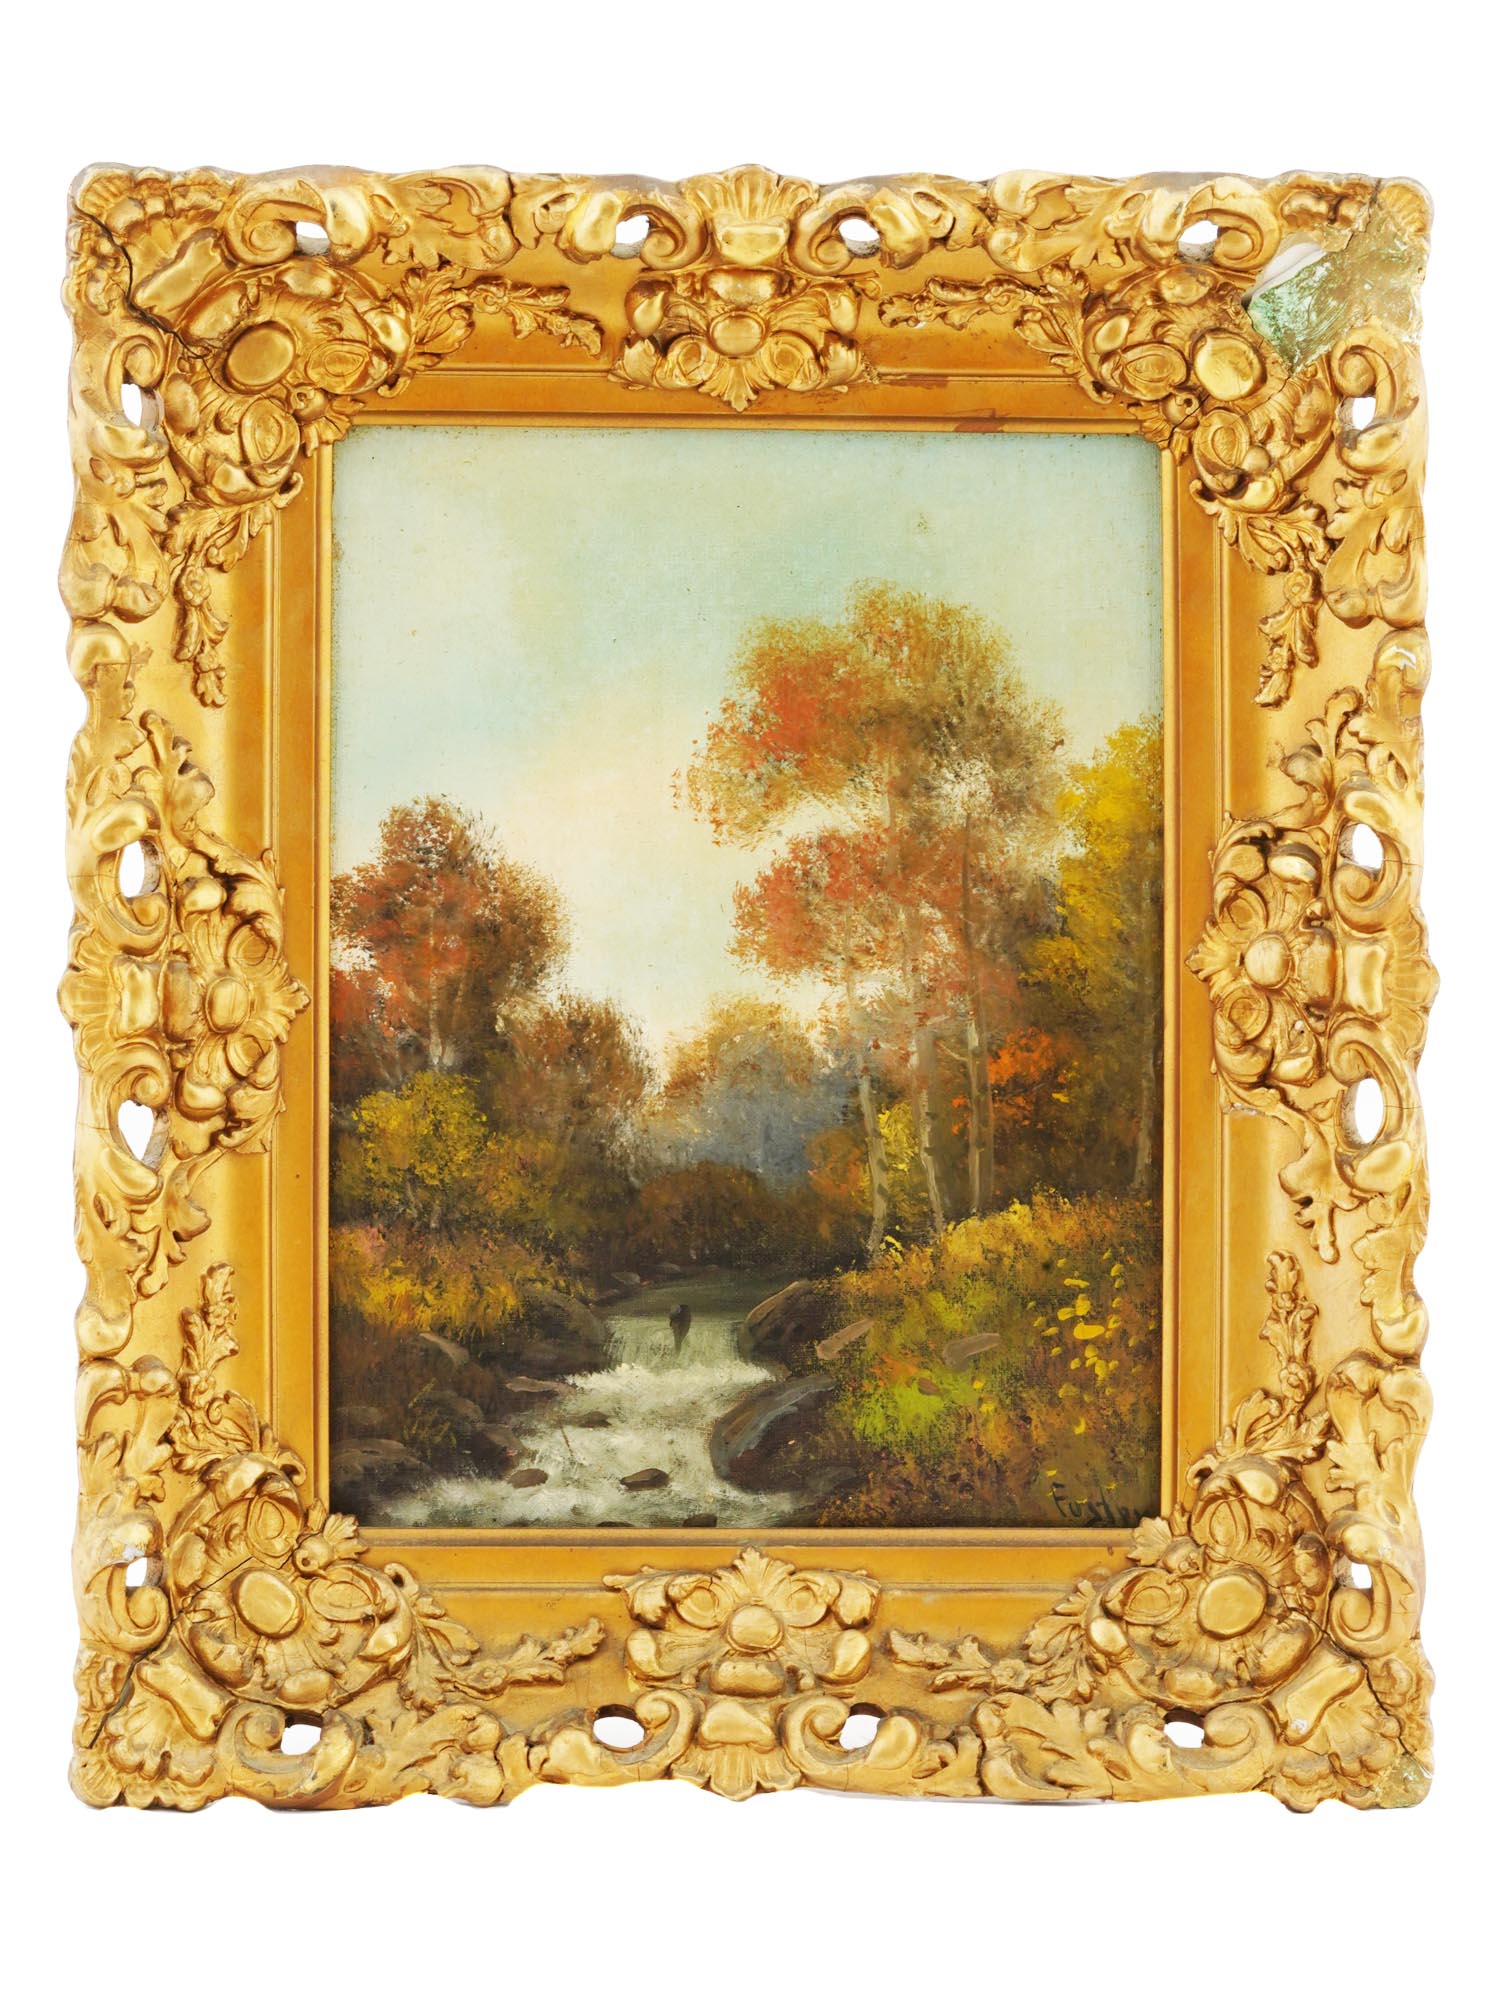 SIGNED OIL ON CANVAS LANDSCAPE PAINTING W RIVER PIC-0